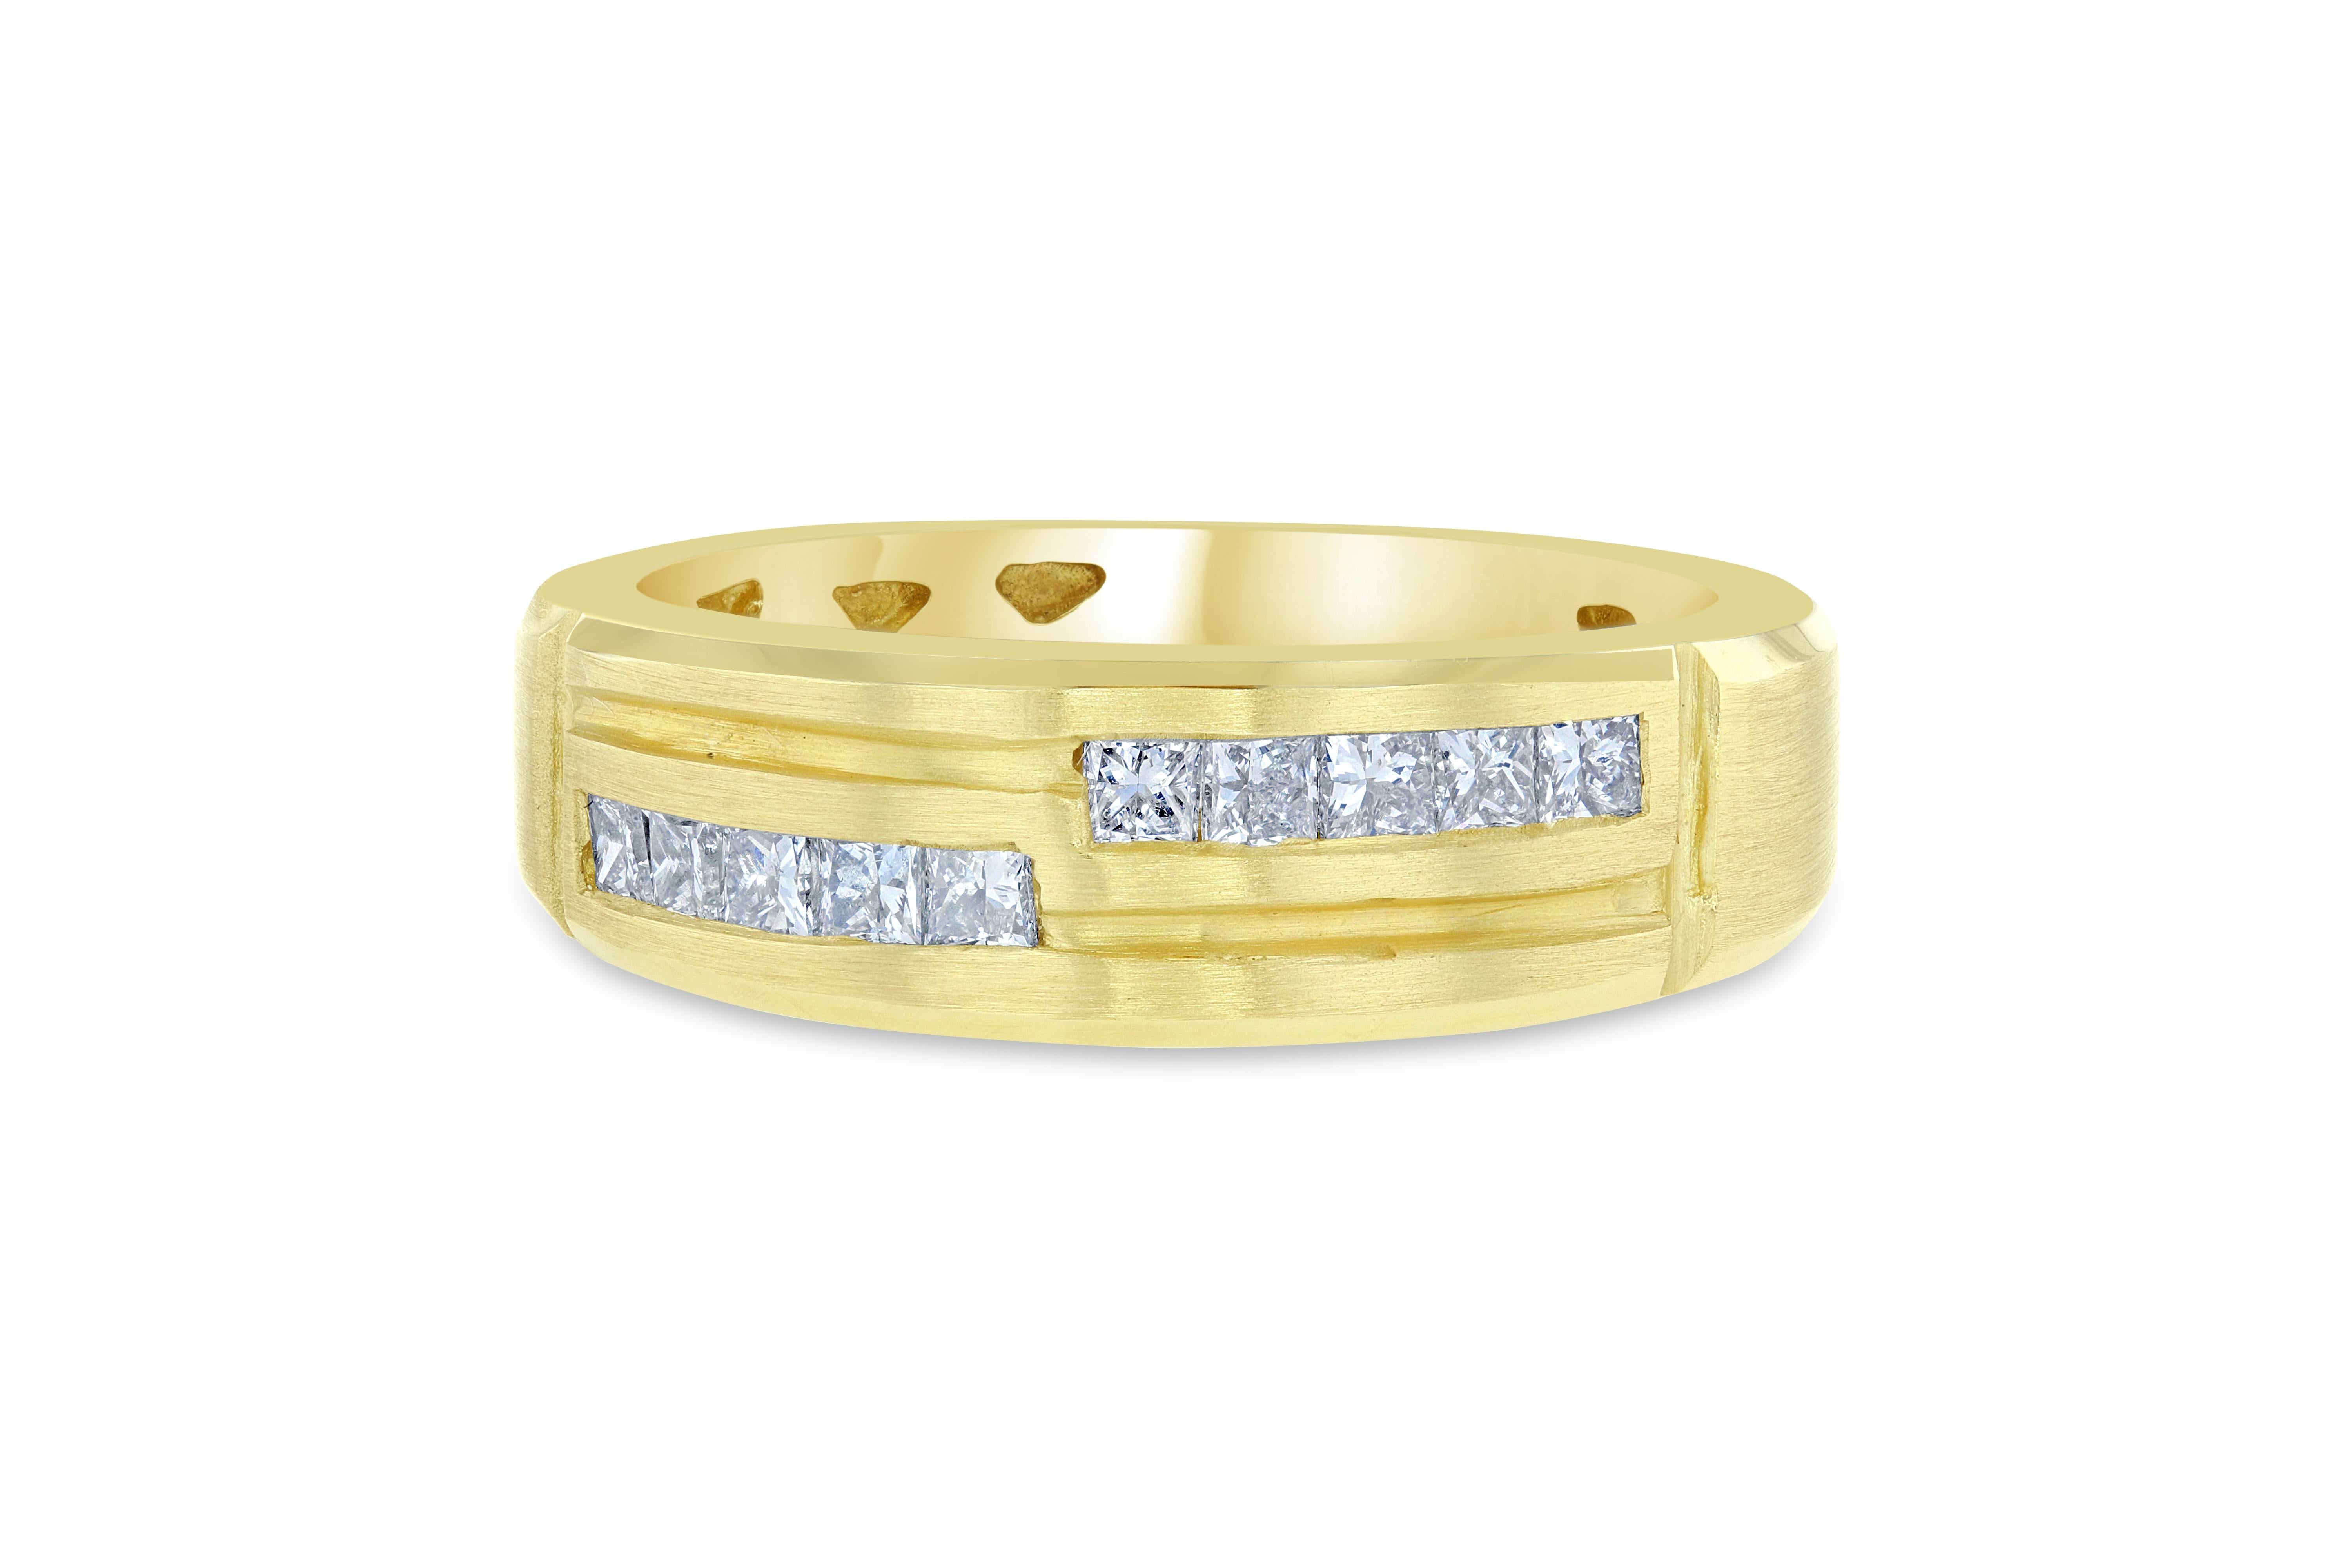 We also carry a Men's Collection! 
This simple yet very unique Men's Band has 16 Princess Cut Diamonds that weigh 0.68 Carats (Clarity: VS, Color: F). It is beautifully crafted in 14K Yellow Gold and is 11.7 grams. The metal is brushed and has a